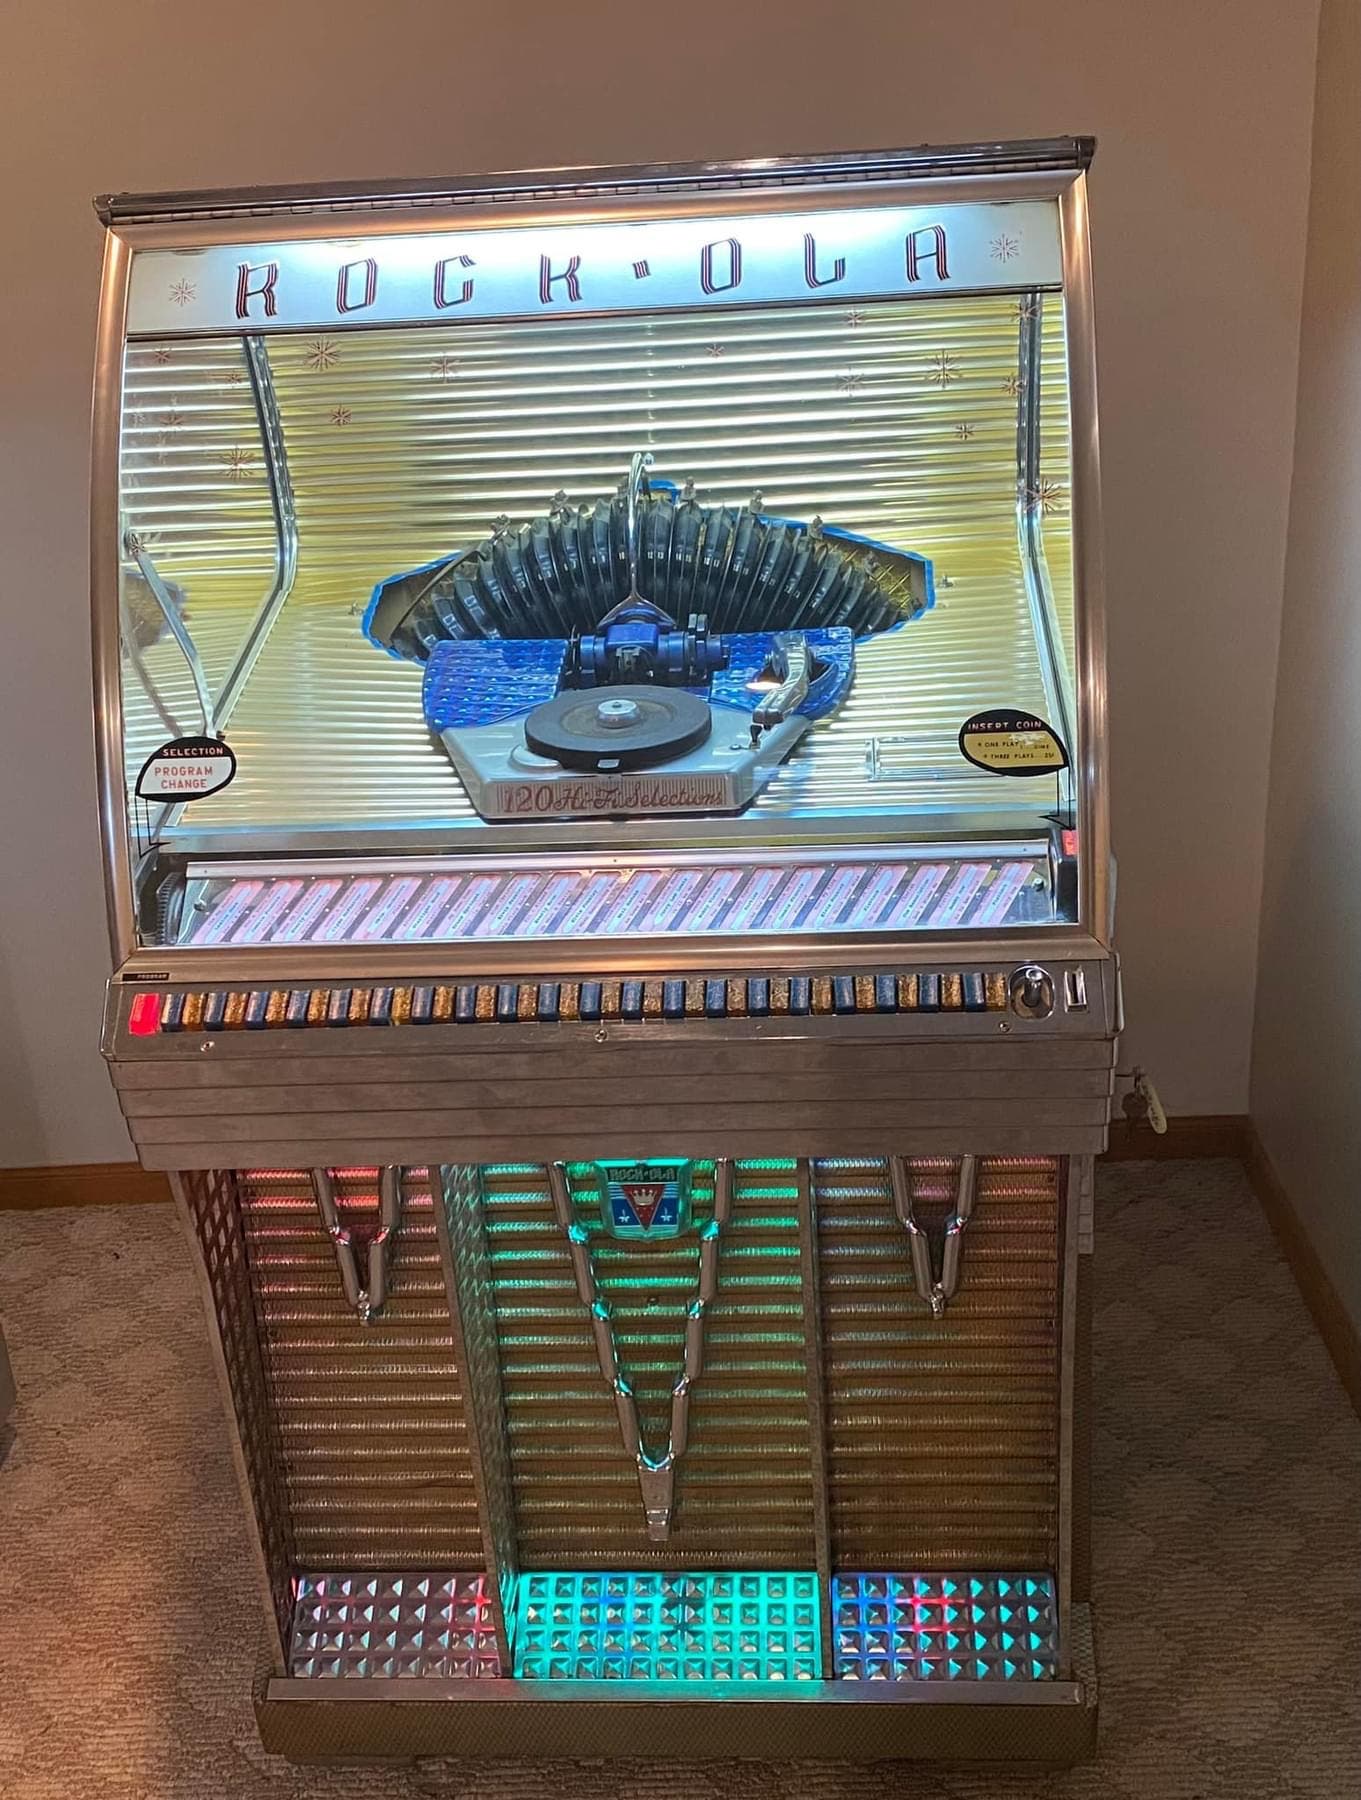 Jukeboxes For Sale